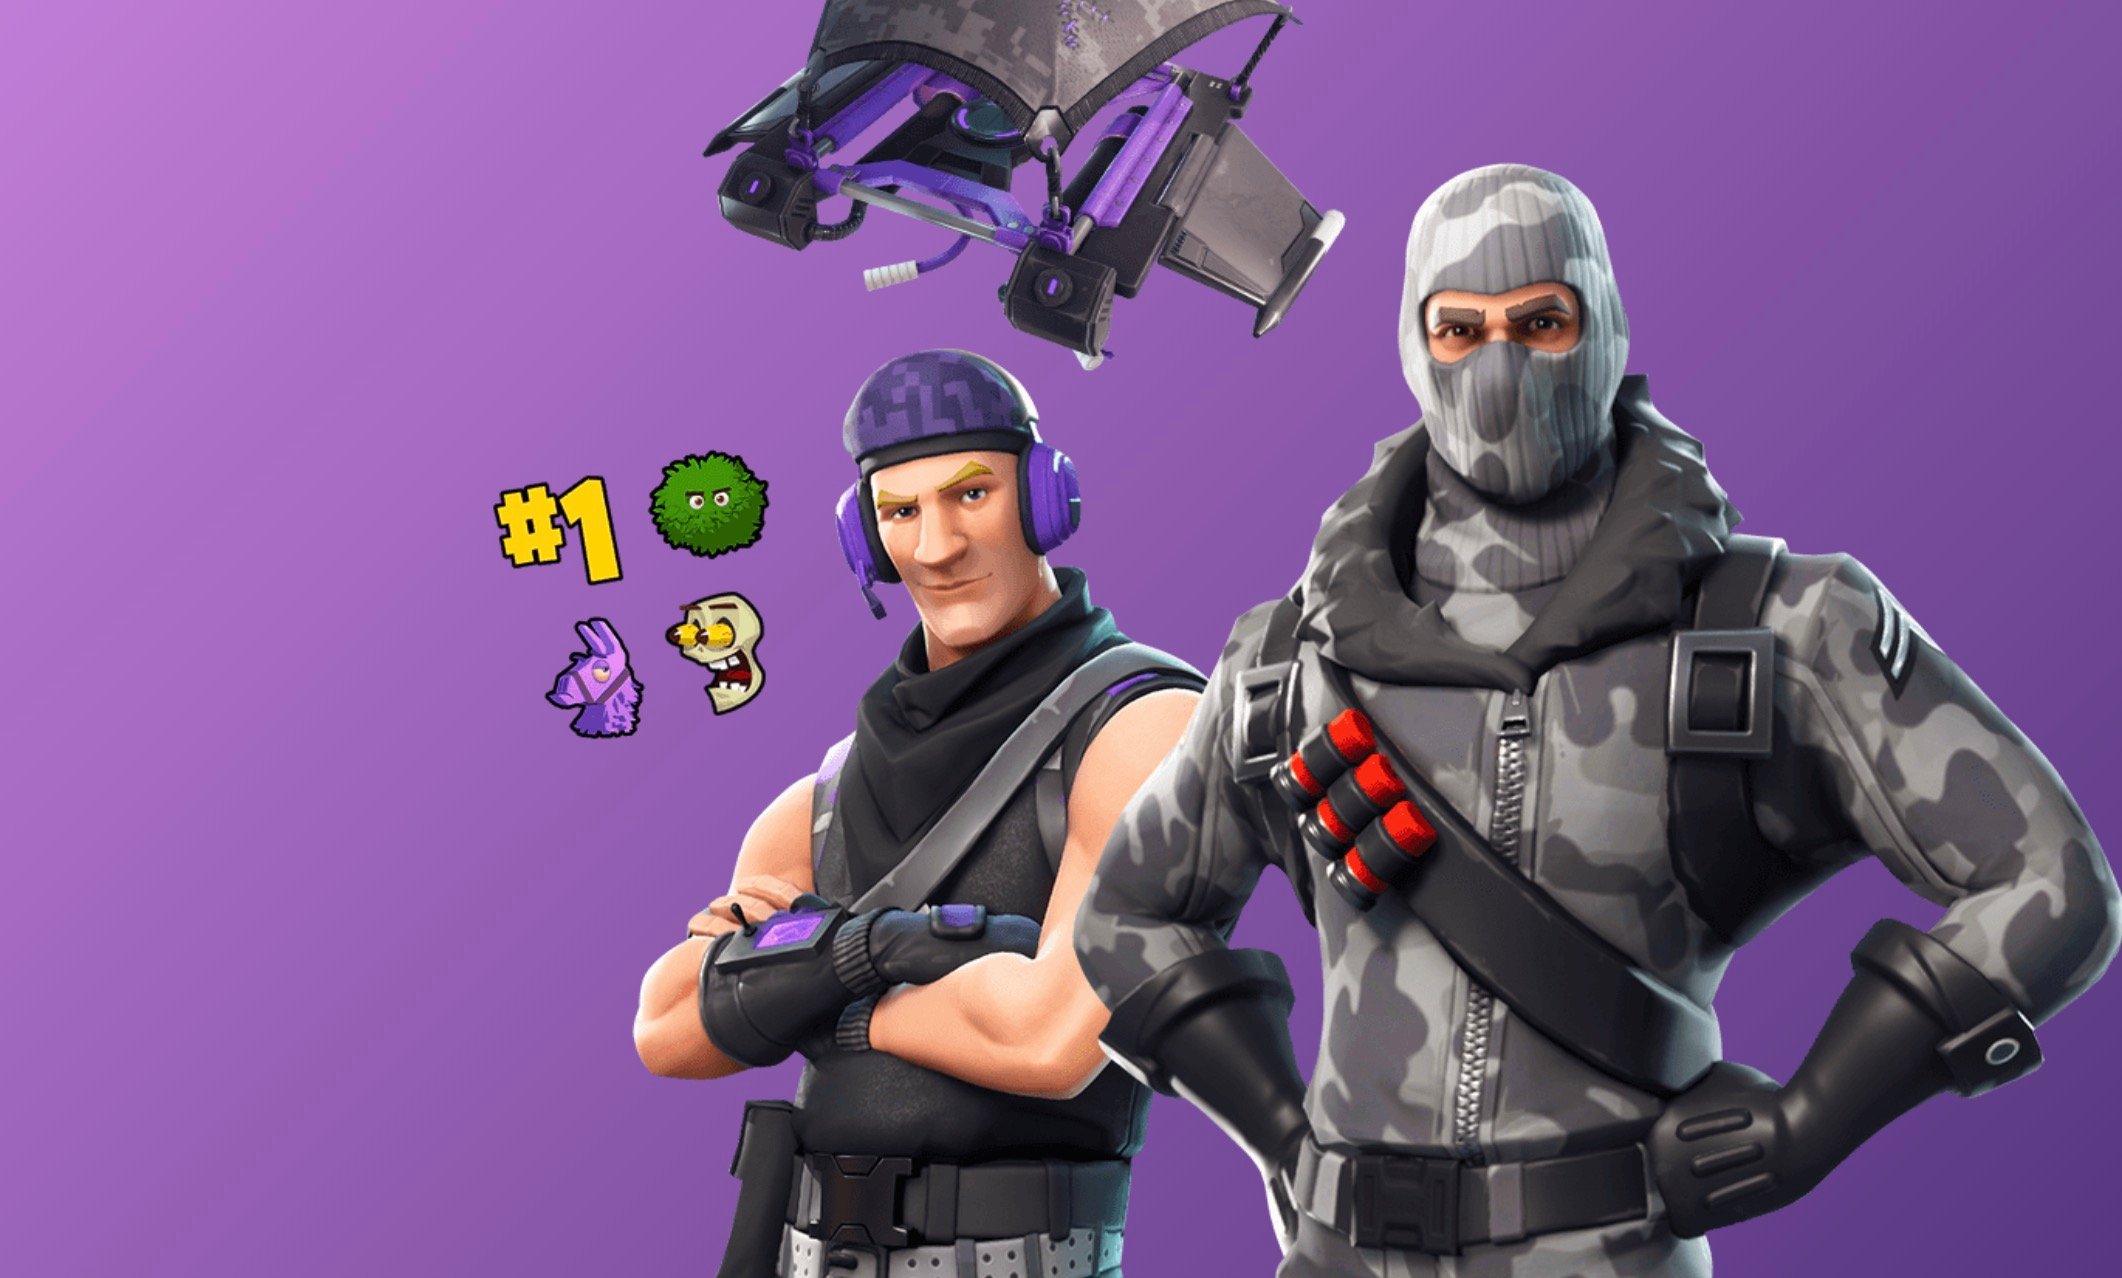 Get your free Twitch Prime Loot including Fortnite Skins and a Glider.